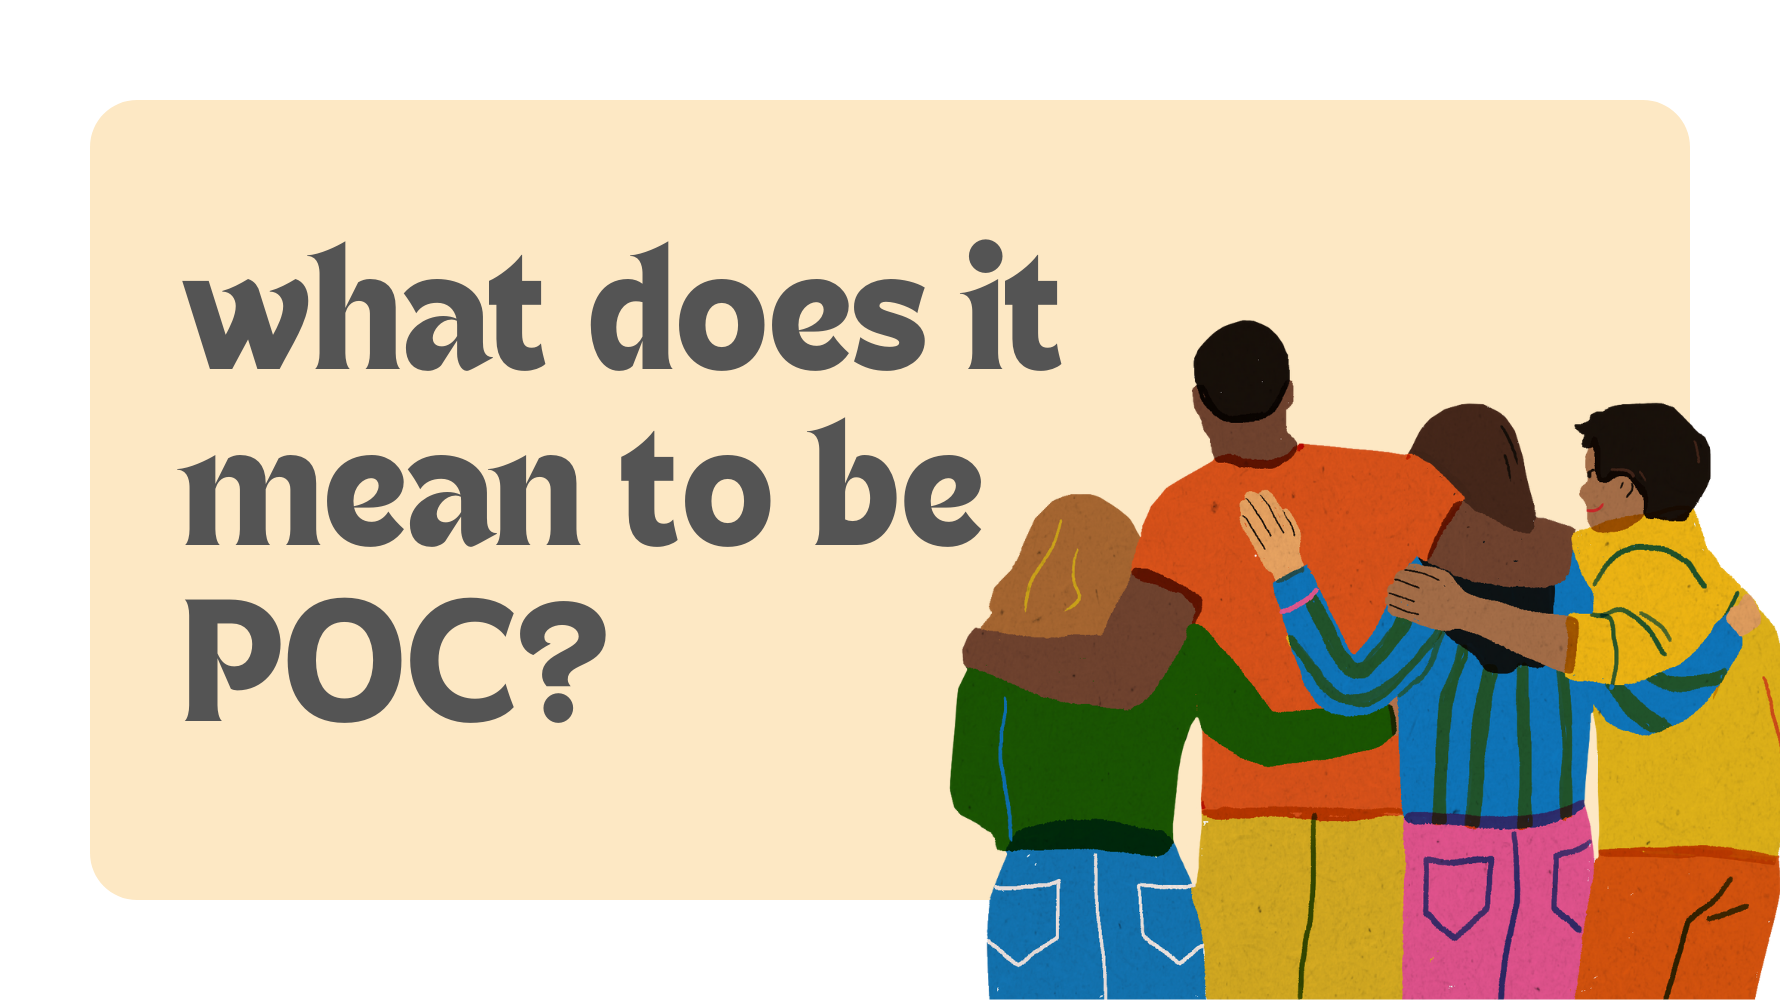 POC: People of Color